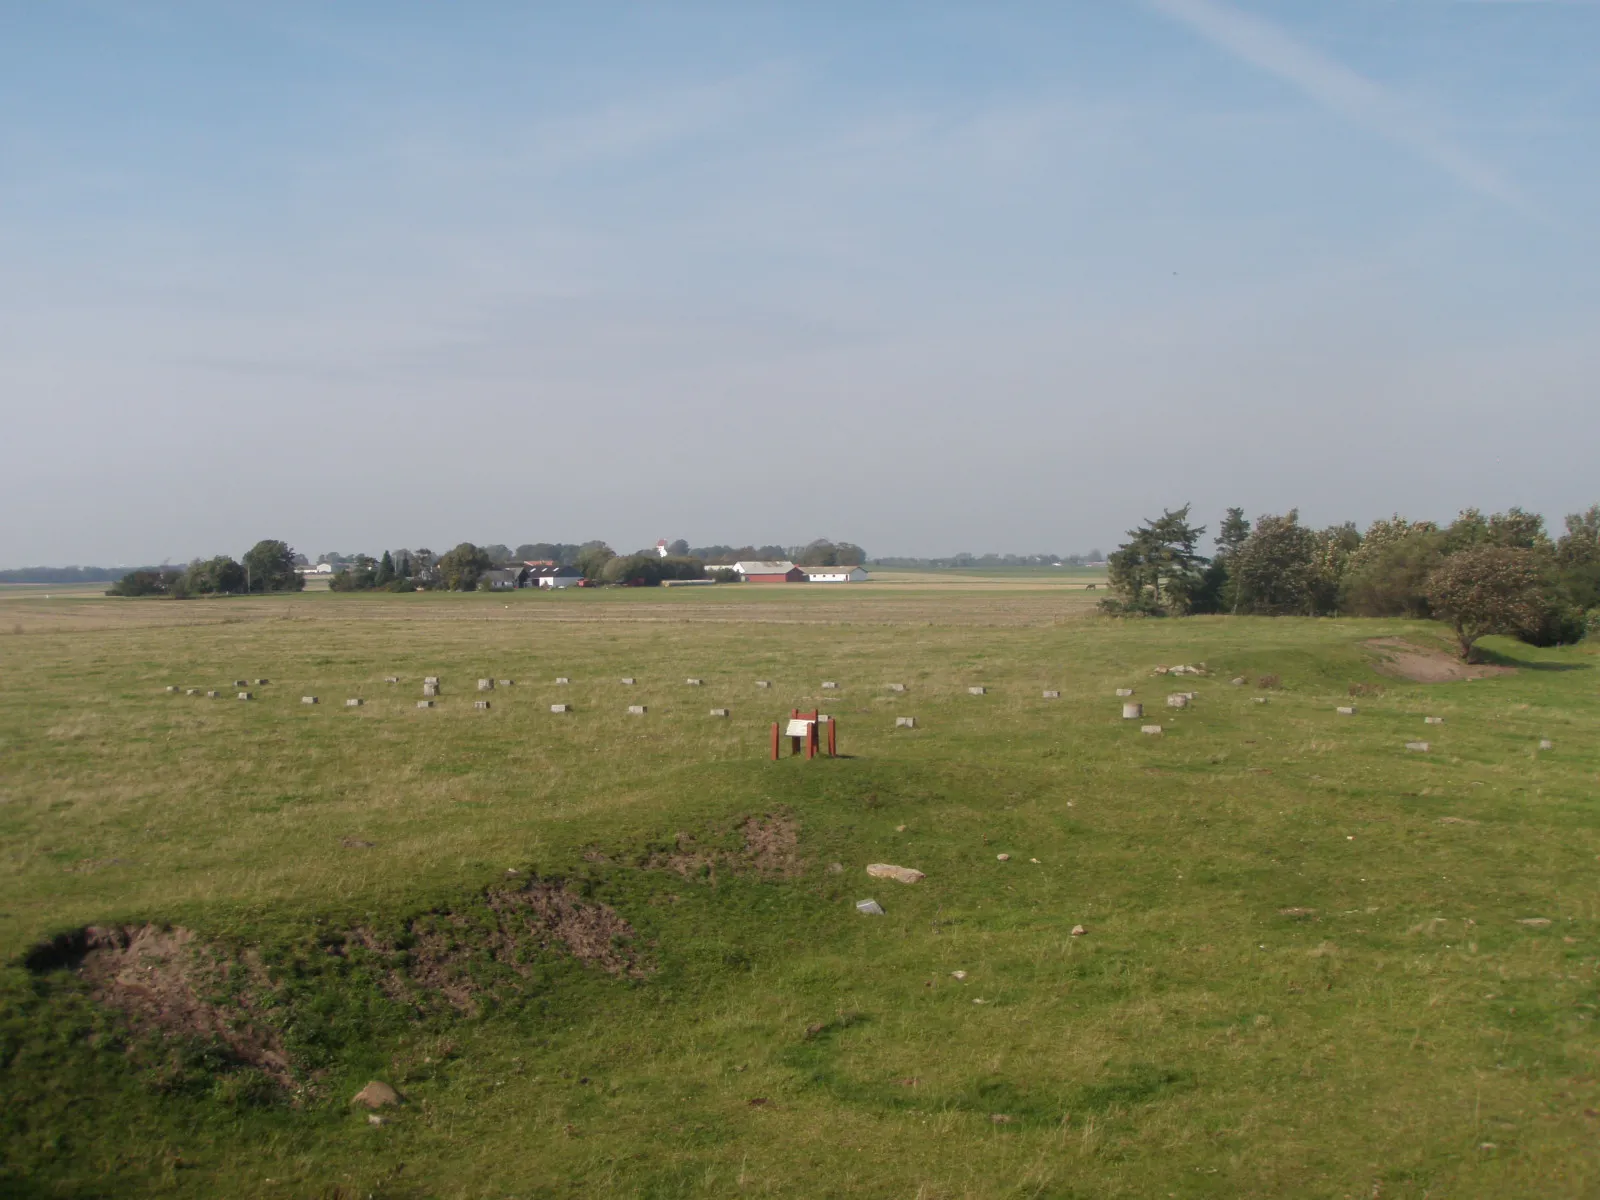 Photo showing: The name Tissø on Sjælland, Danmark is well over 1000 years old and will probably be the god of war Tir or Ty in the Nordic gods mythology. Excavations took place here under the direction of archaeologist Lars Jørgensen in 1995-2003. Rich discoveries, among other weapons, suggesting that there has been a ritual sacrifice to the holy lake in the early Iron Age (Merovingians time - the Viking period), then one of Europe's largest ch richest settlements with the great man's residence, commercial and cult center was in the Western side of the lake of the same name as the site. Archaeological artifacts found at archaeological sites are numerous, showing import objects, and wealth, for example, is a necklace of gold at 2 kg. Lake Tissø was navigable by ships of antiquity, from the sea and along Halleby on to the port at the settlement Tissø. Chief farm in Viking times consisted of seven buildings on an area of 20 000 square meters. Hall building was 48 meters long and 12 ½ meters wide or 500 square meters, whose pole holes are marked at the bird tower at the lake. Trade stalls were at the lake and the river Halleby A large area of the pit house for short stays shows that this is collected an entire district for religious gatherings during pagan times. The place lost its importance since the Middle Ages began and the center of power moved to the other side of the lake, where the church was built in Sæby and Hvide family lived in a mansion.